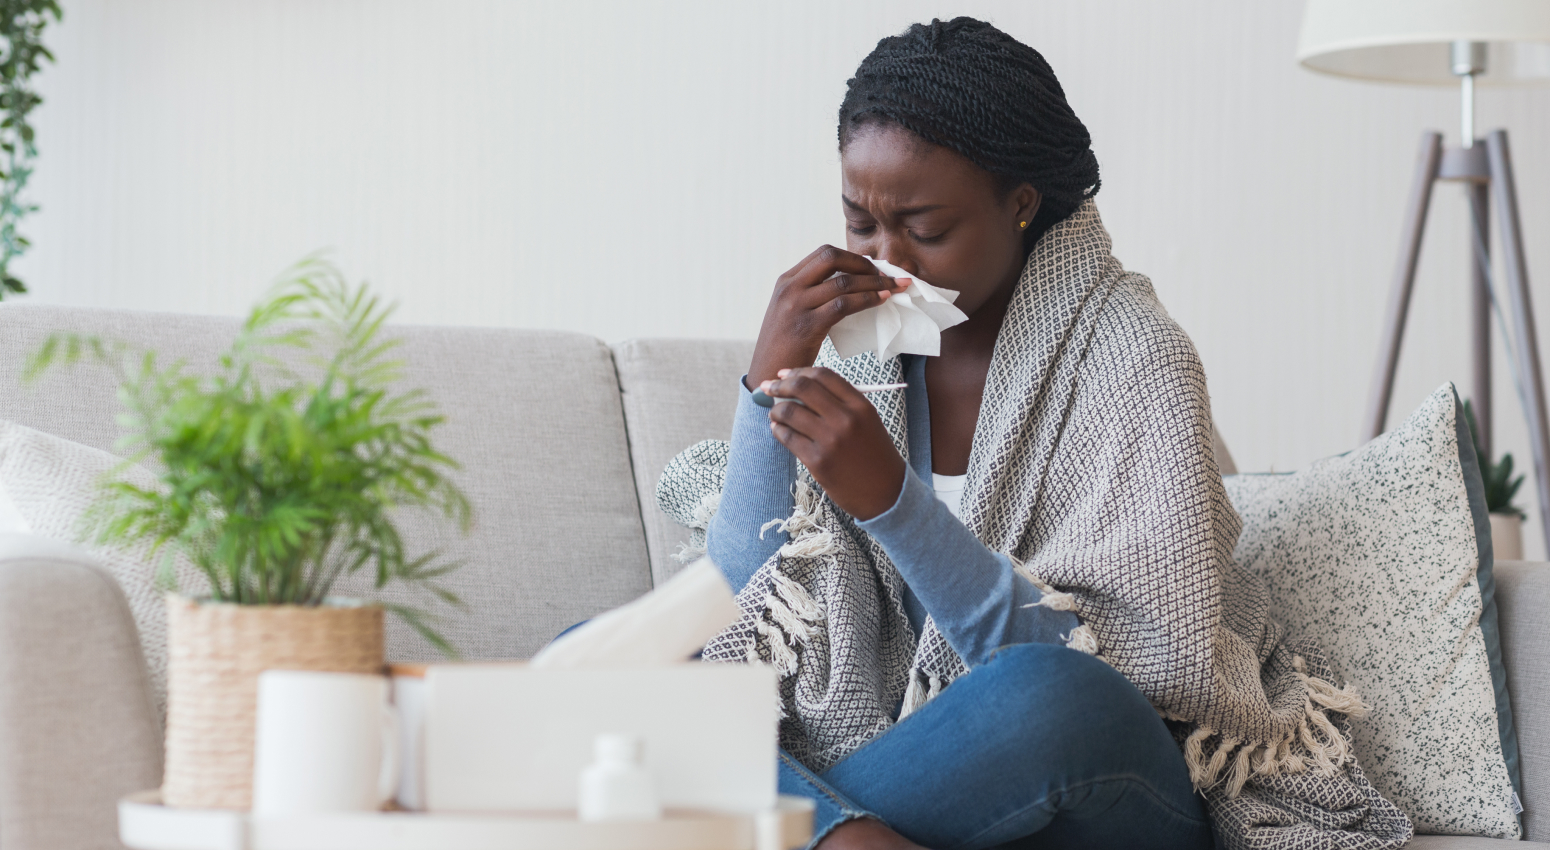 A woman sits on a couch while using a tissue on her face. There are resources available for those enduring illness and hospitalization to help reduce medical bills as well as provide healthcare coverage. 